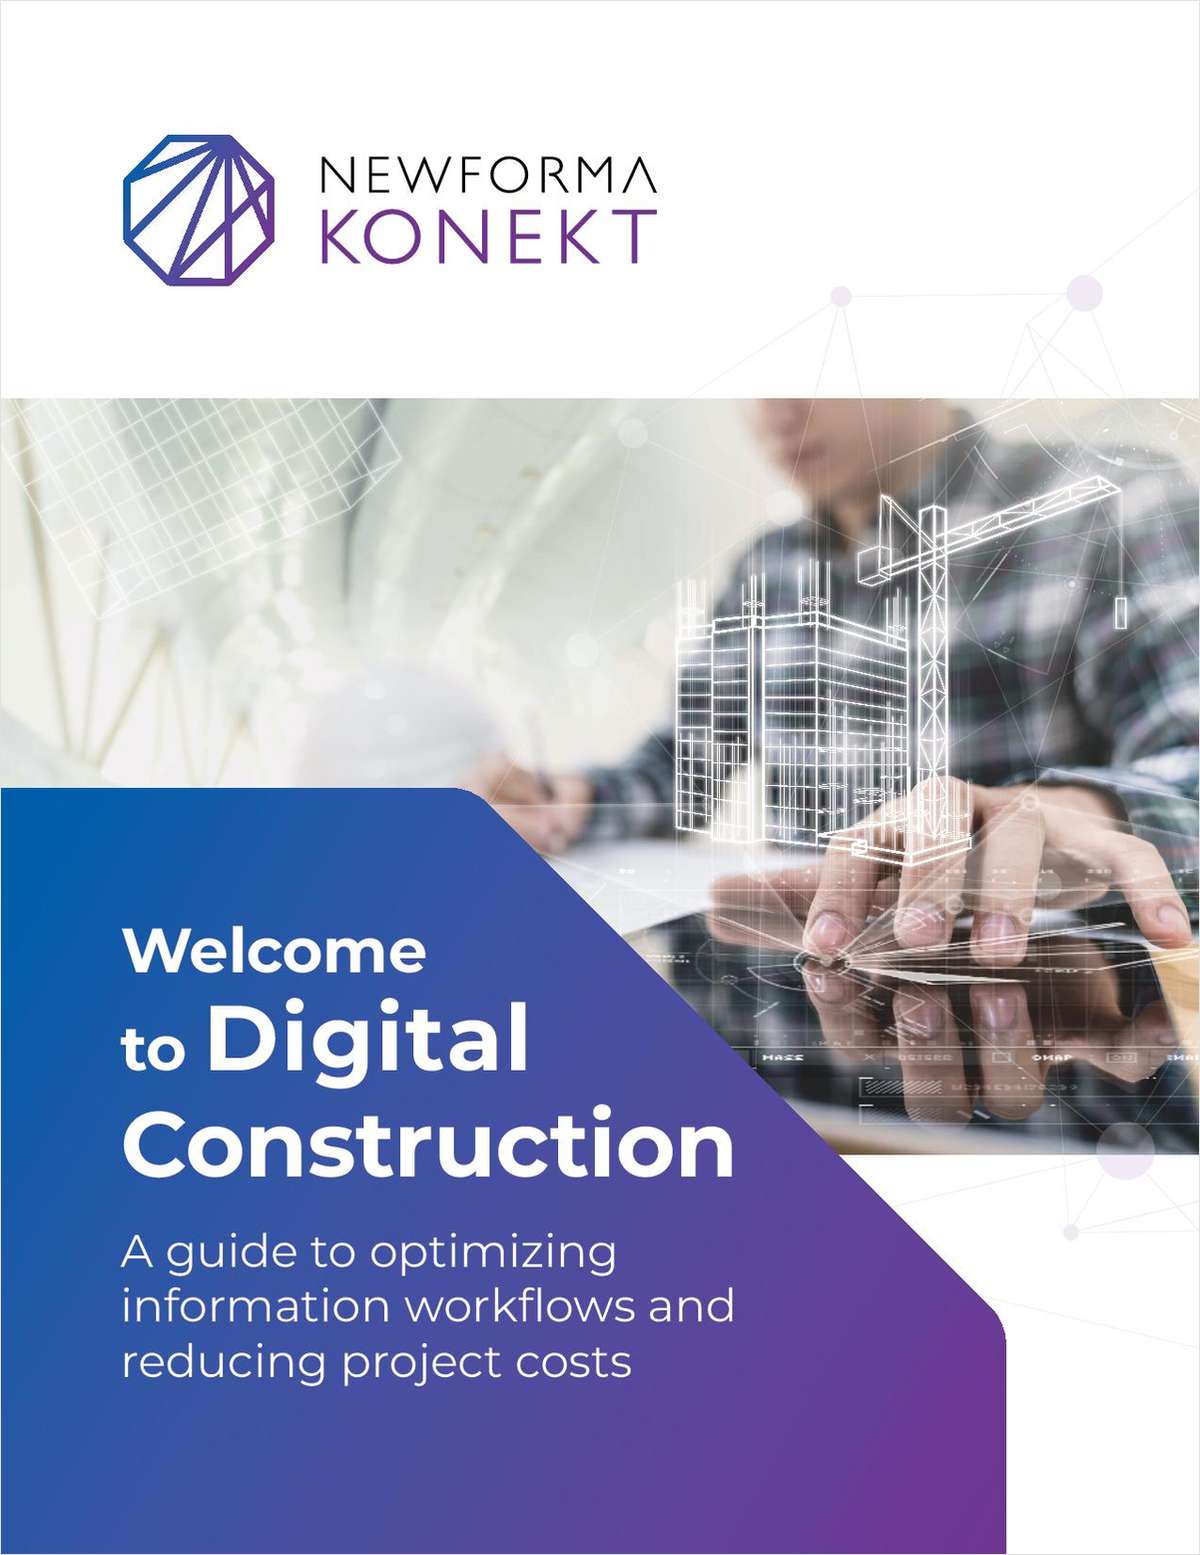 Welcome to Digital Construction: A Guide to Optimizing Information Workflows and Reducing Project Costs